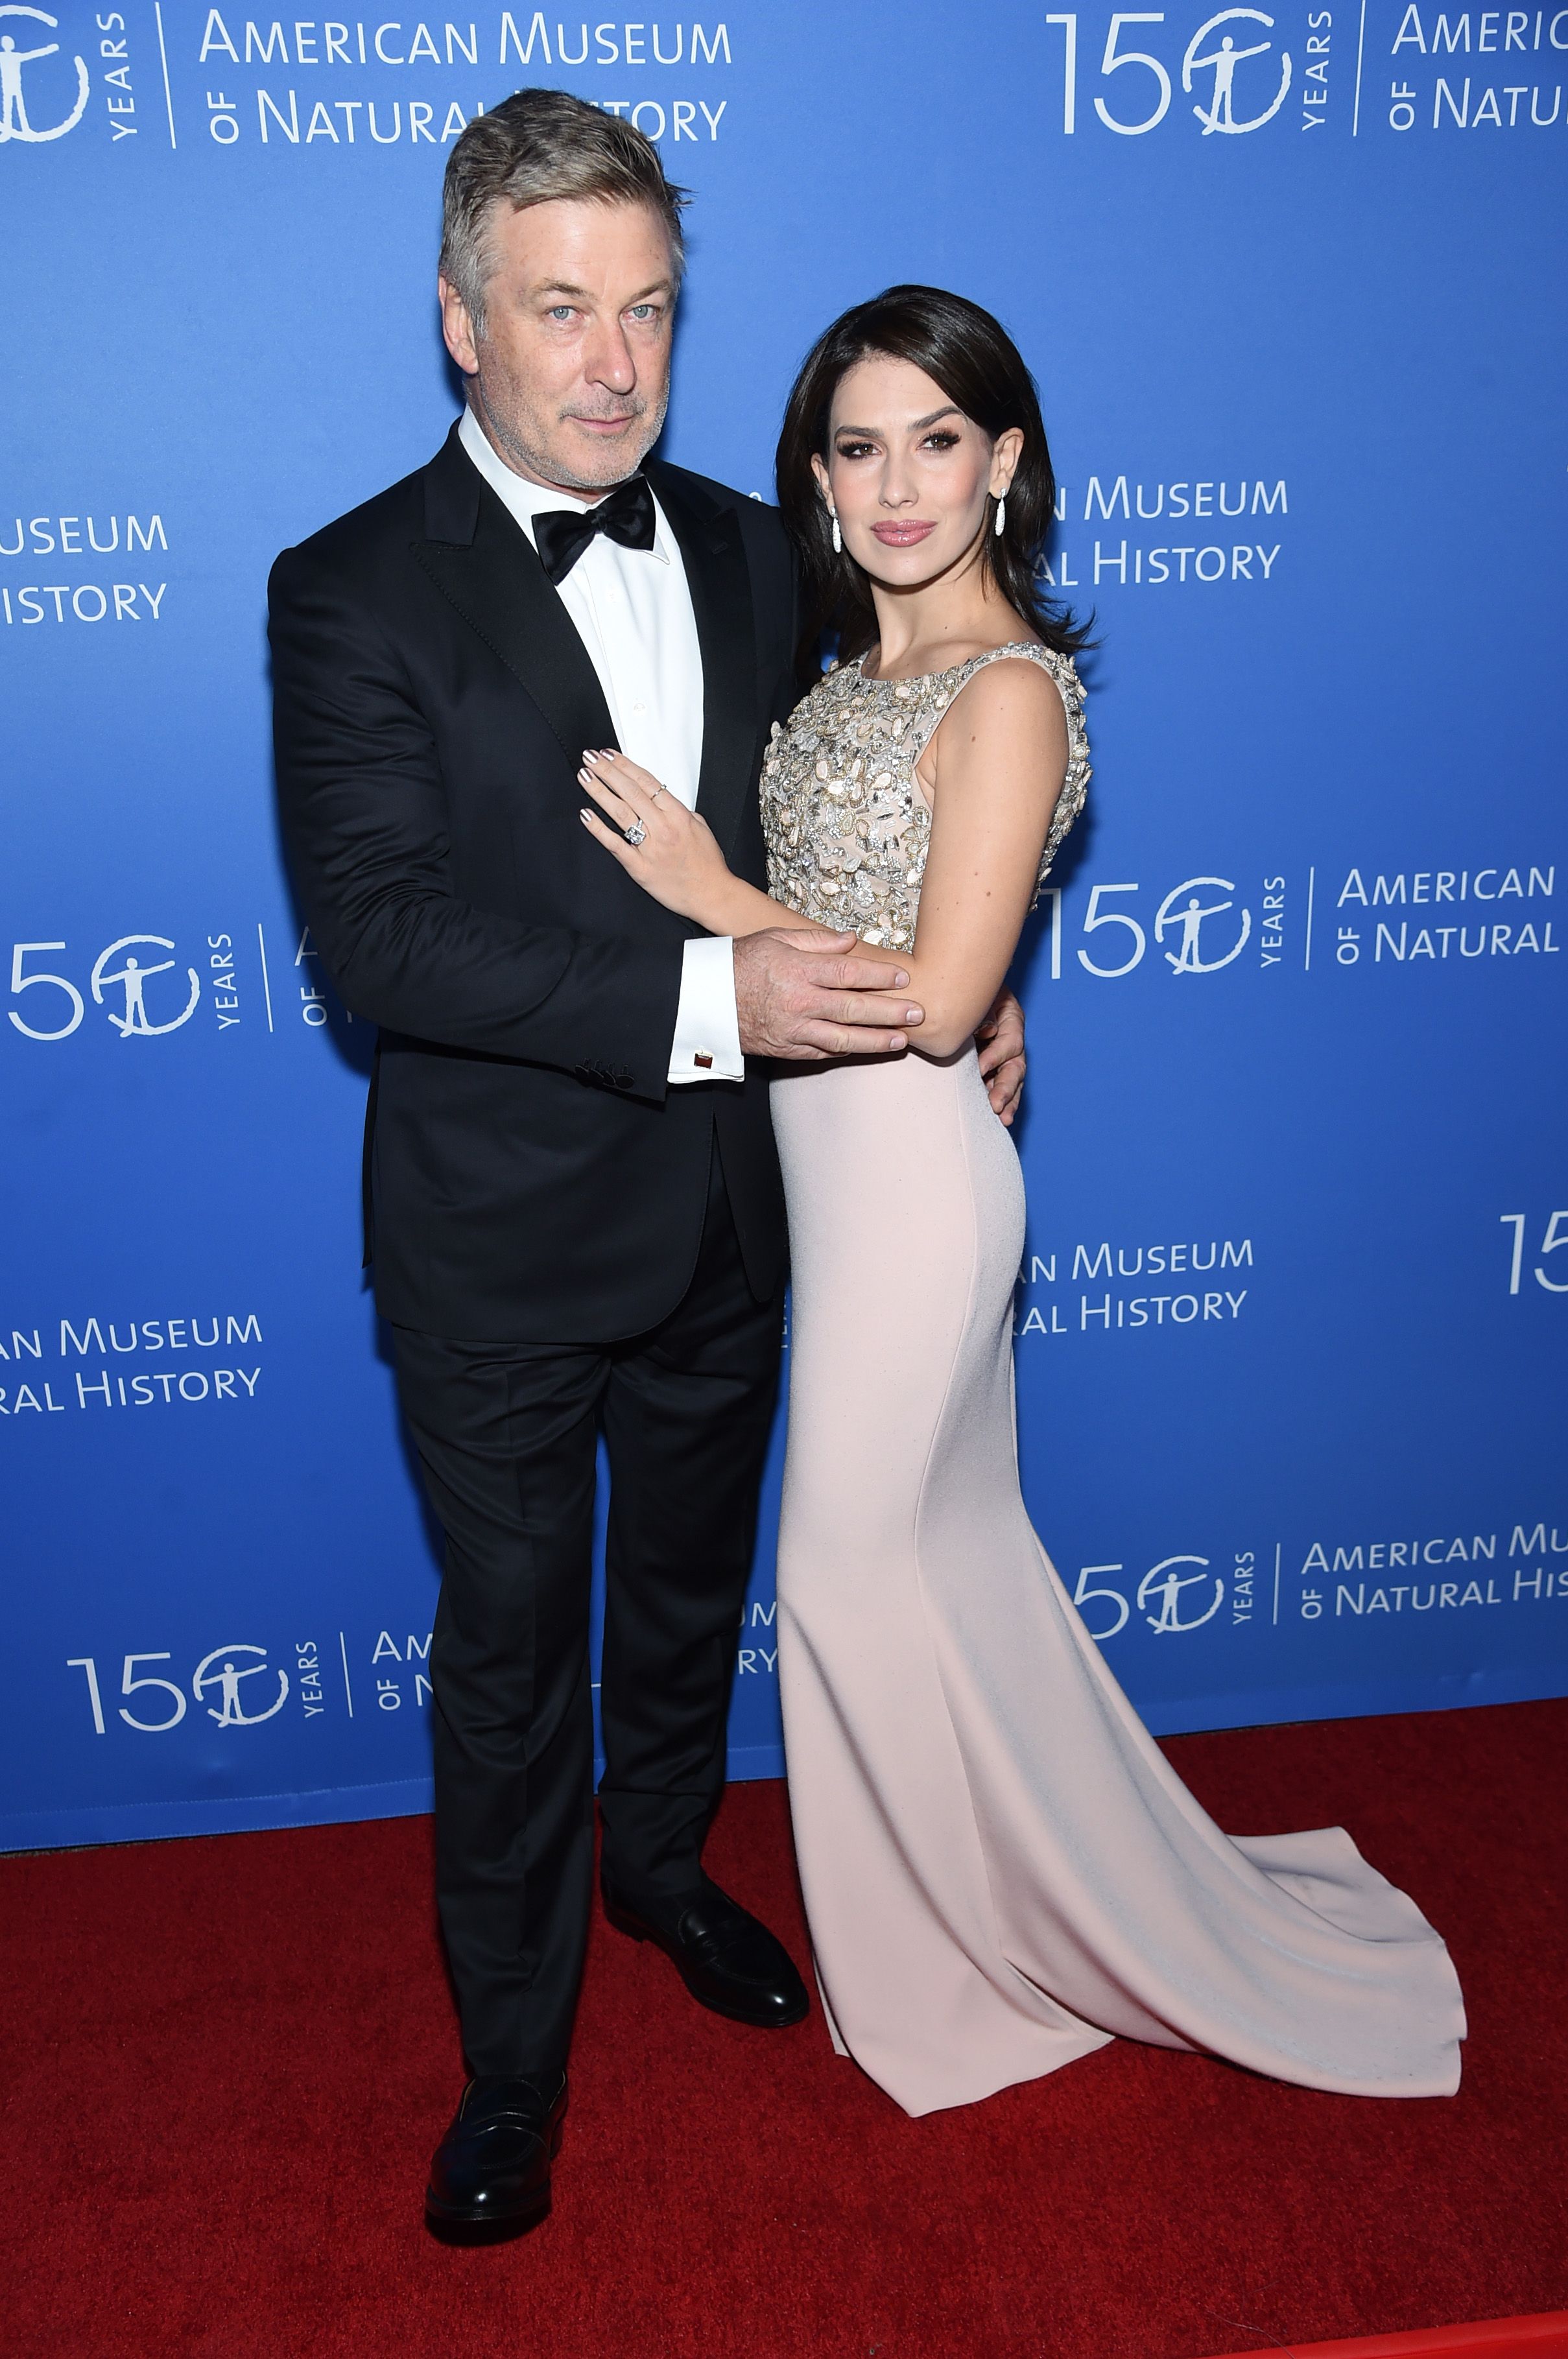 Alec and Hilaria Baldwin attend the American Museum Of Natural History Gala on November 21, 2019, in New York City. | Source: Getty Images